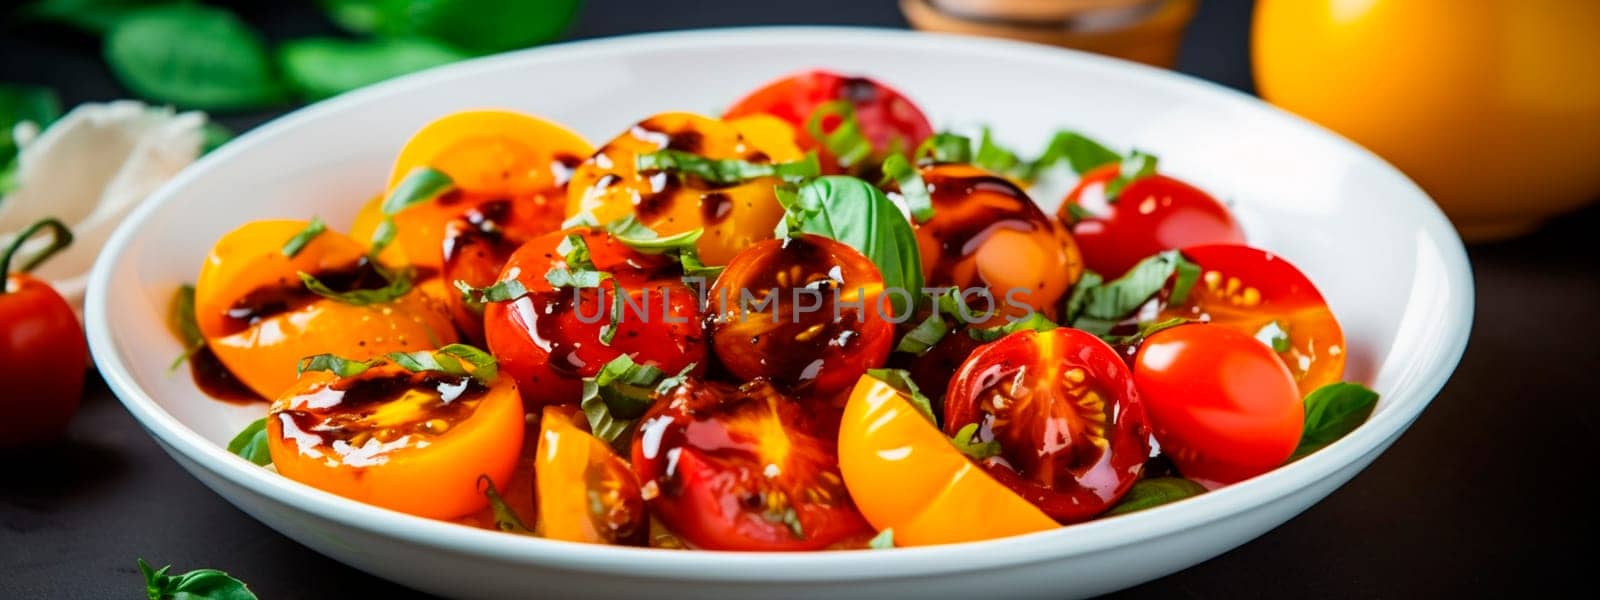 salad with tomato and herbs. Selective focus. food.